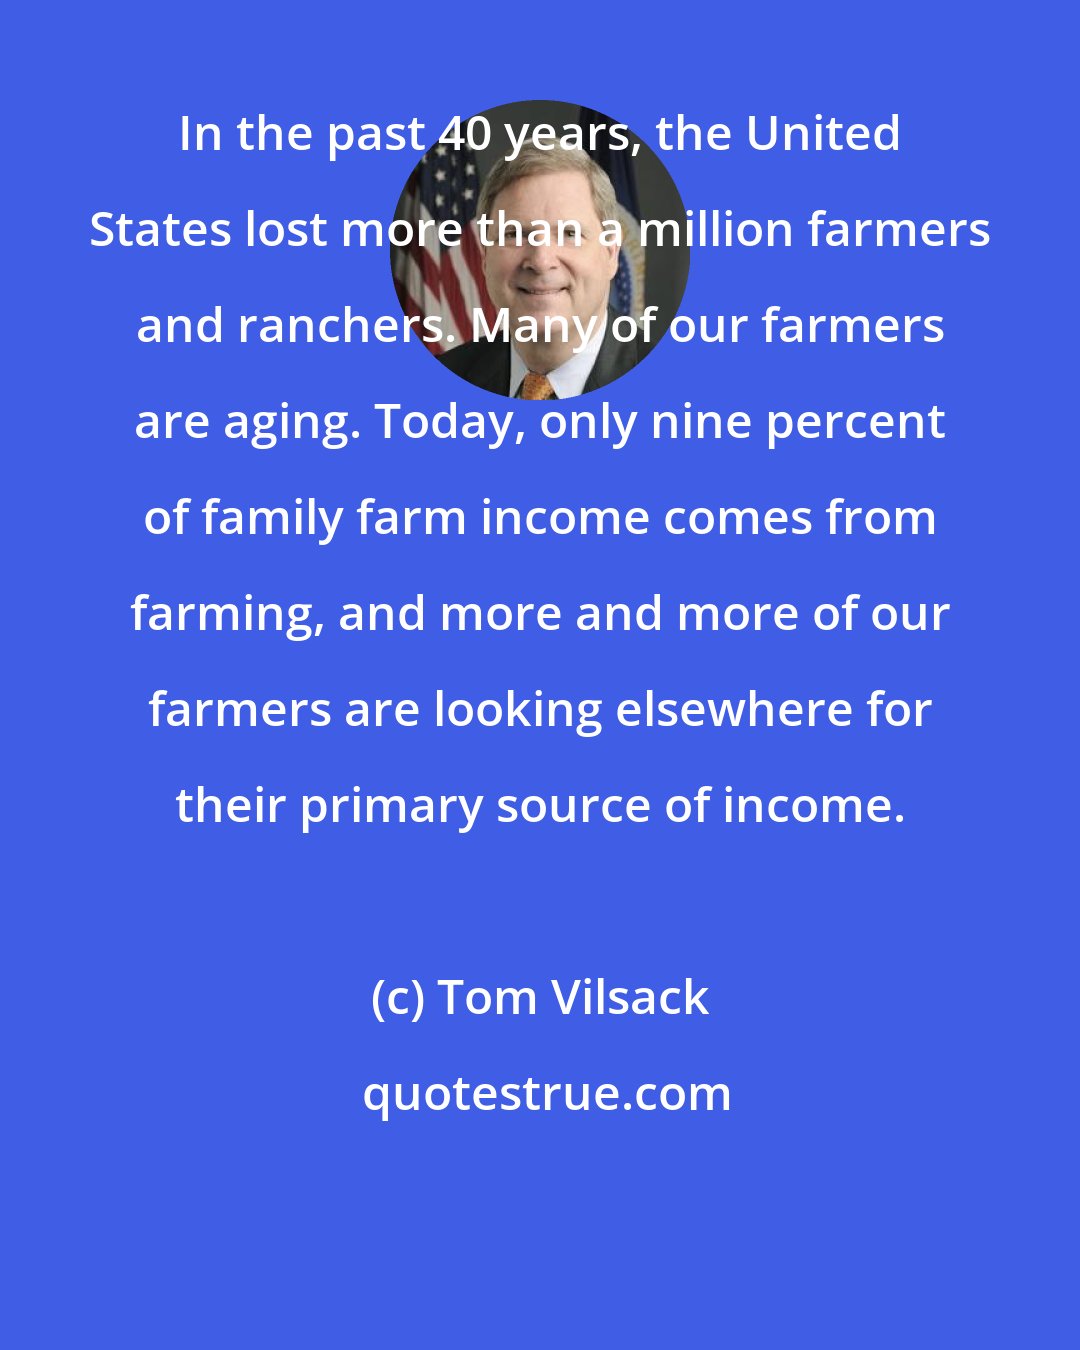 Tom Vilsack: In the past 40 years, the United States lost more than a million farmers and ranchers. Many of our farmers are aging. Today, only nine percent of family farm income comes from farming, and more and more of our farmers are looking elsewhere for their primary source of income.